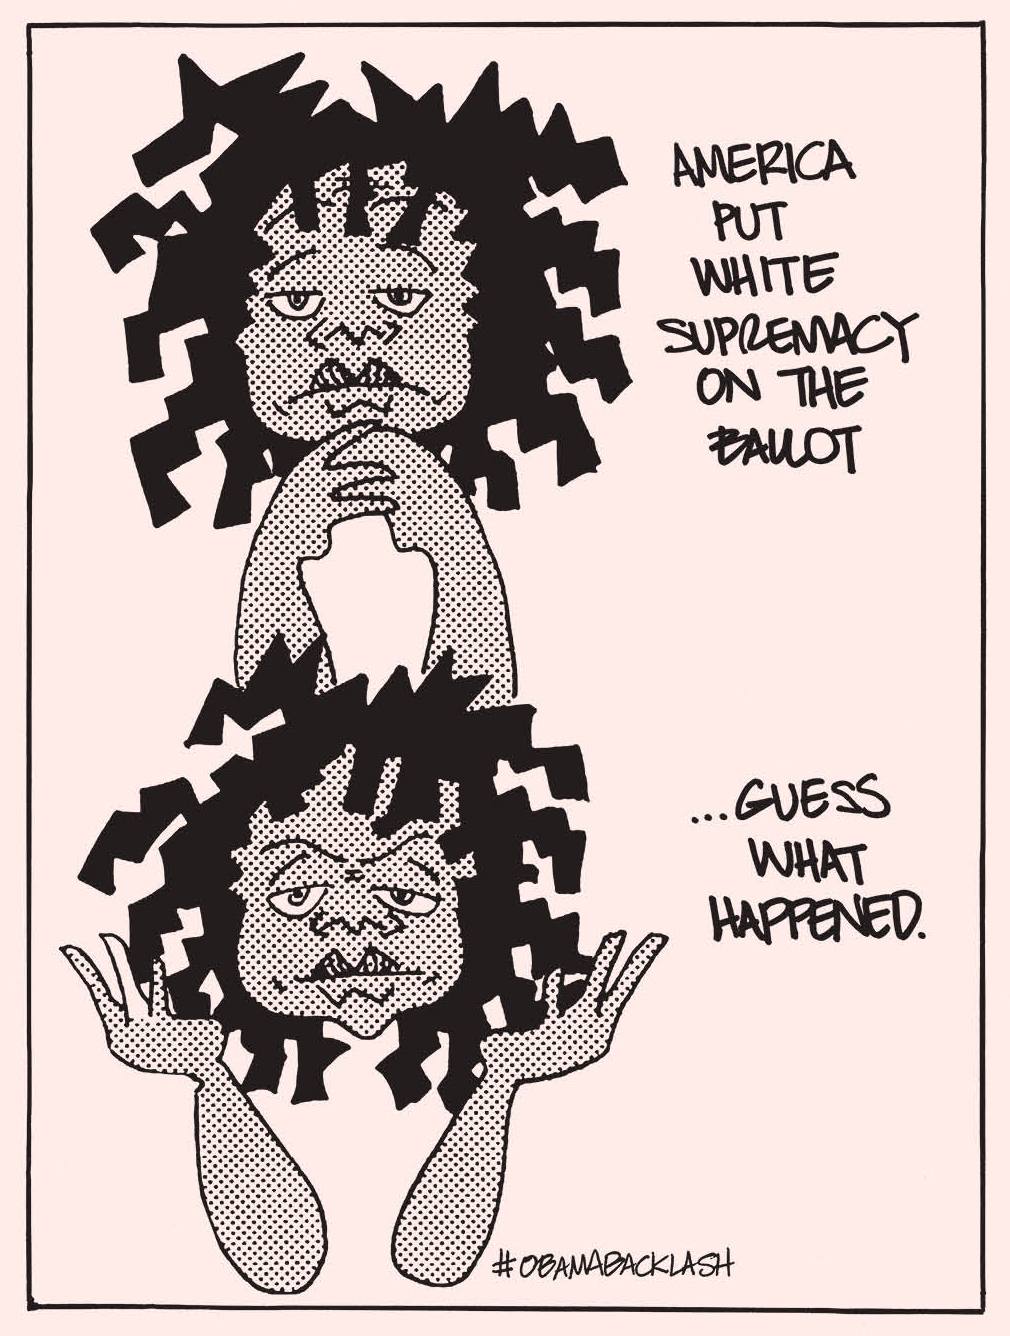 A one-panel comic depicts a Black woman processing the presence of white supremacy on the ballot.